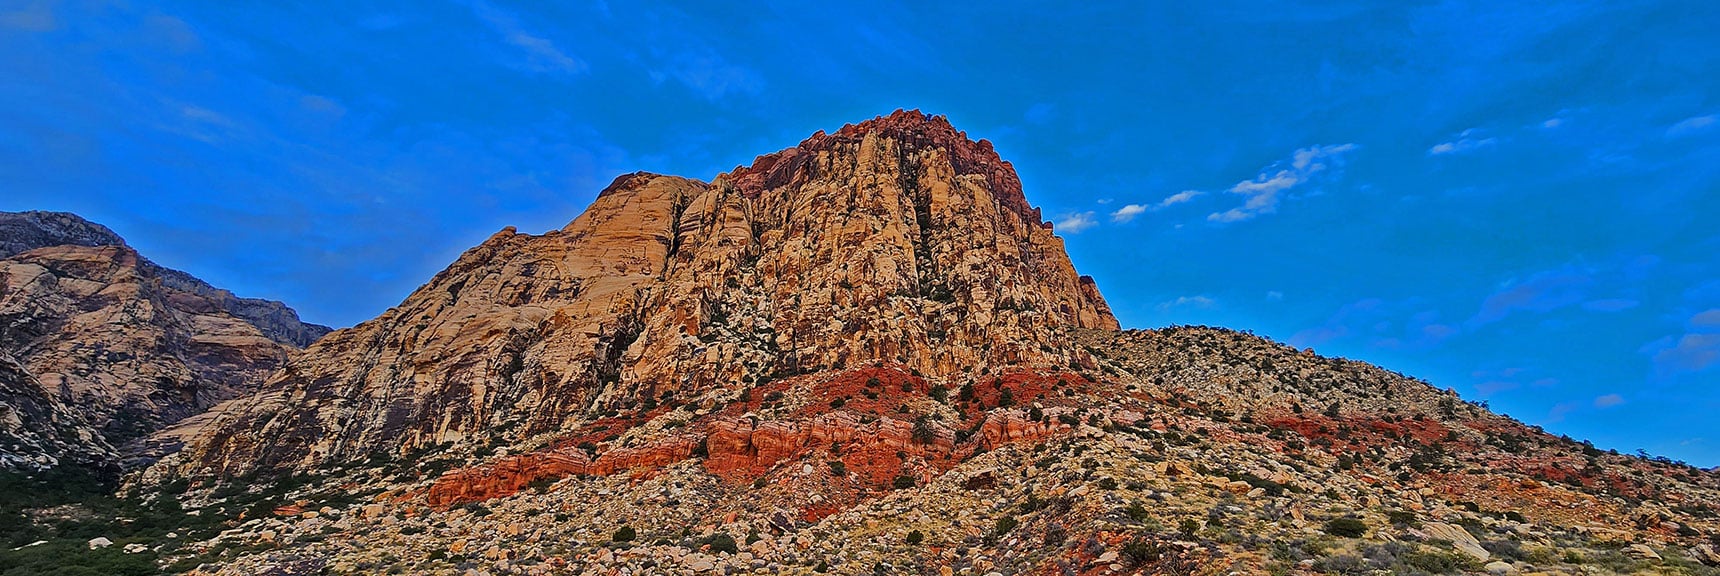 Southeastern View of Rainbow Mountain from the Canyon Entrance | Oak Creek Canyon North Branch Toward Rainbow Mountains Upper Crest Ridgeline | Rainbow Mountain Wilderness, Nevada